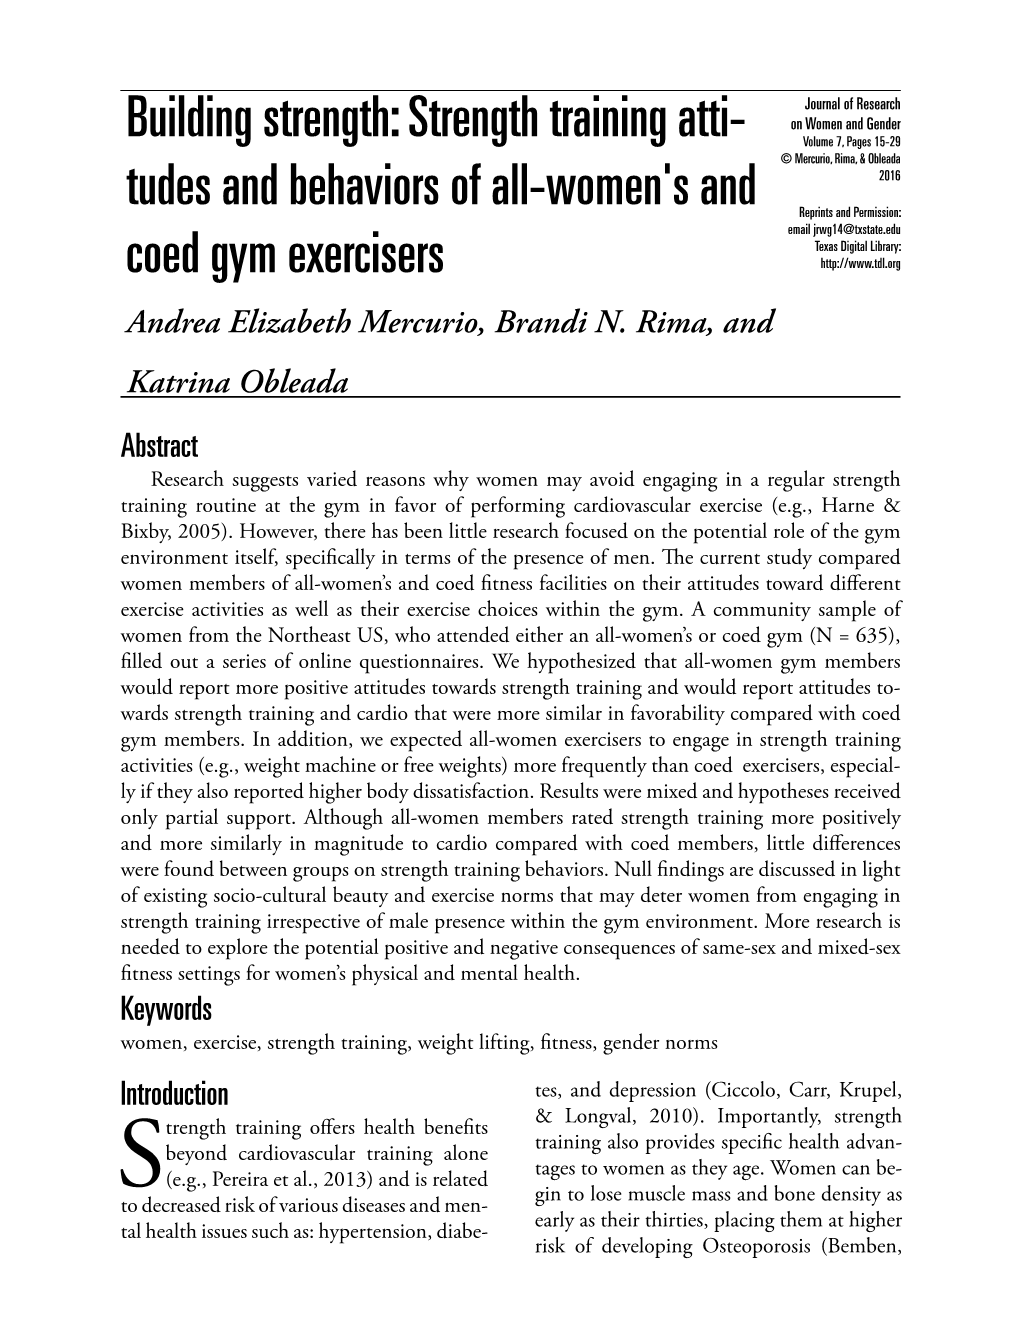 Tudes and Behaviors of All-Women's and Coed Gym Exercisers